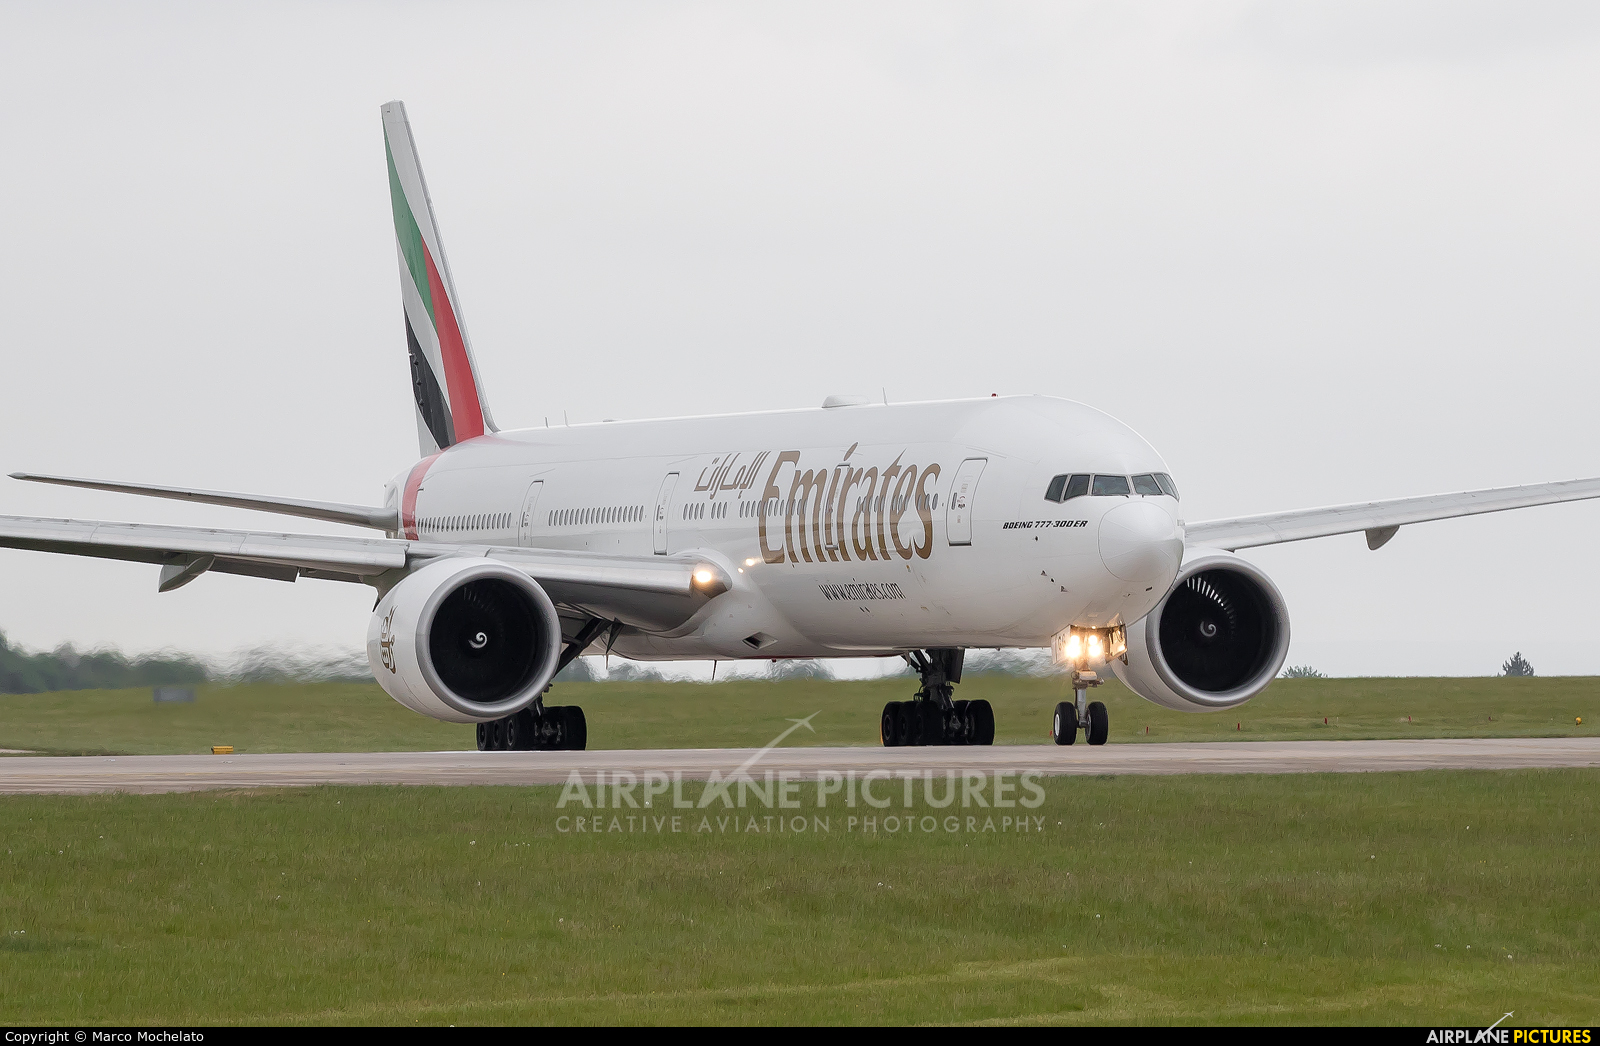 Emirates Airlines A6-EGG aircraft at Manchester